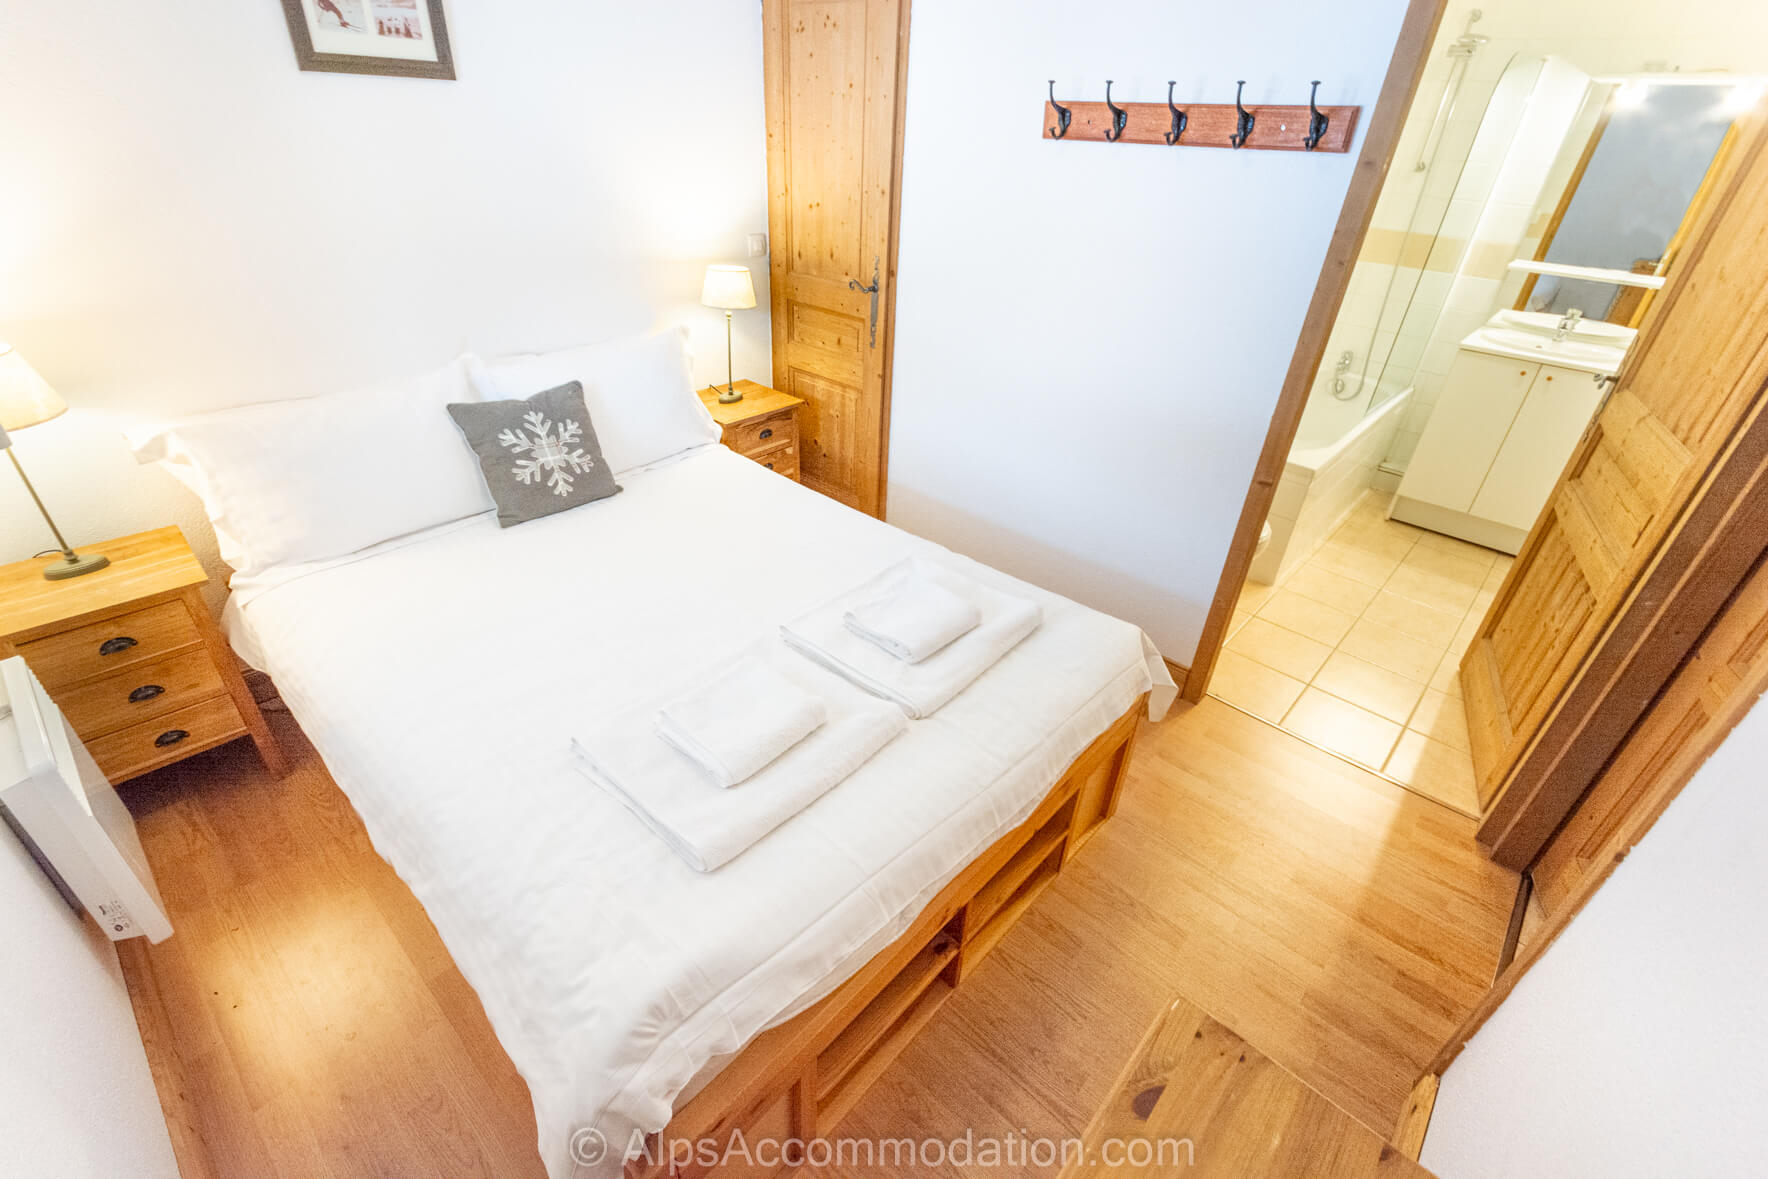 B11 Jardin Alpin Morillon 1100 - Master bedroom with double bed and ensuite bathroom